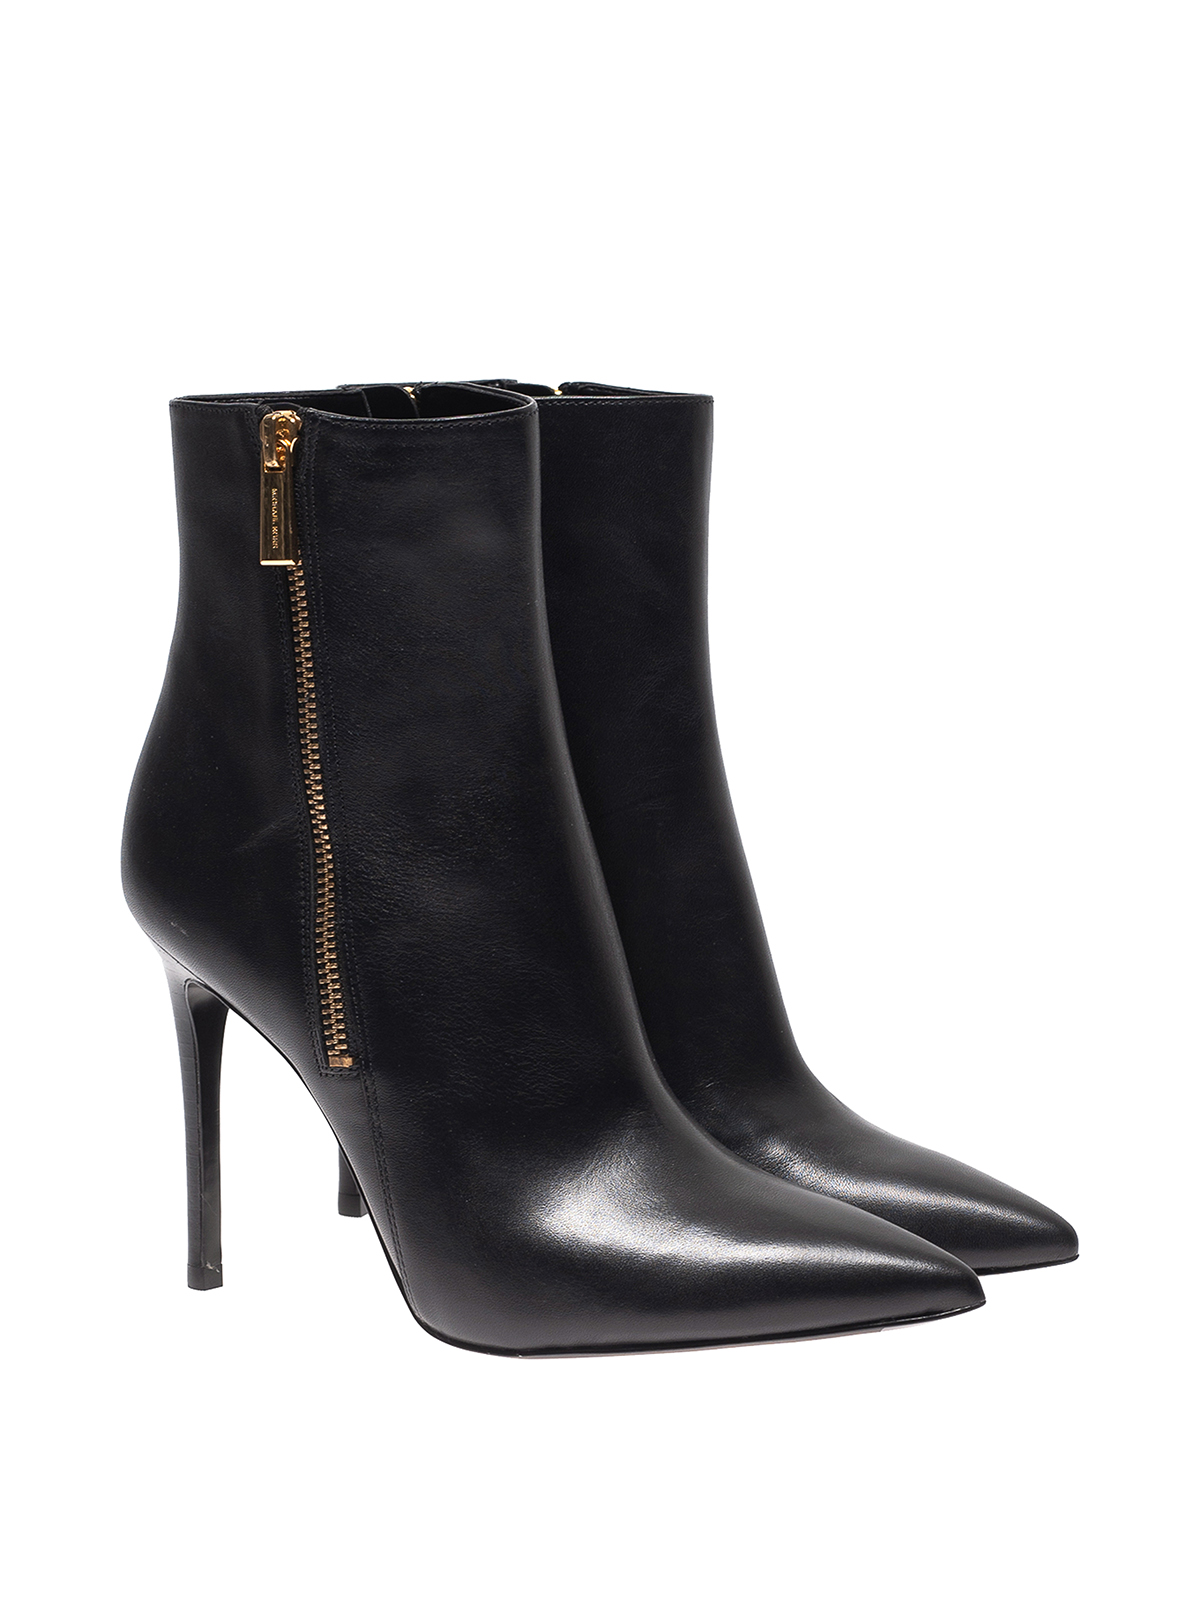 Ankle boots Michael Kors - Keke double zip ankle boots - 40F9KEHE6L001